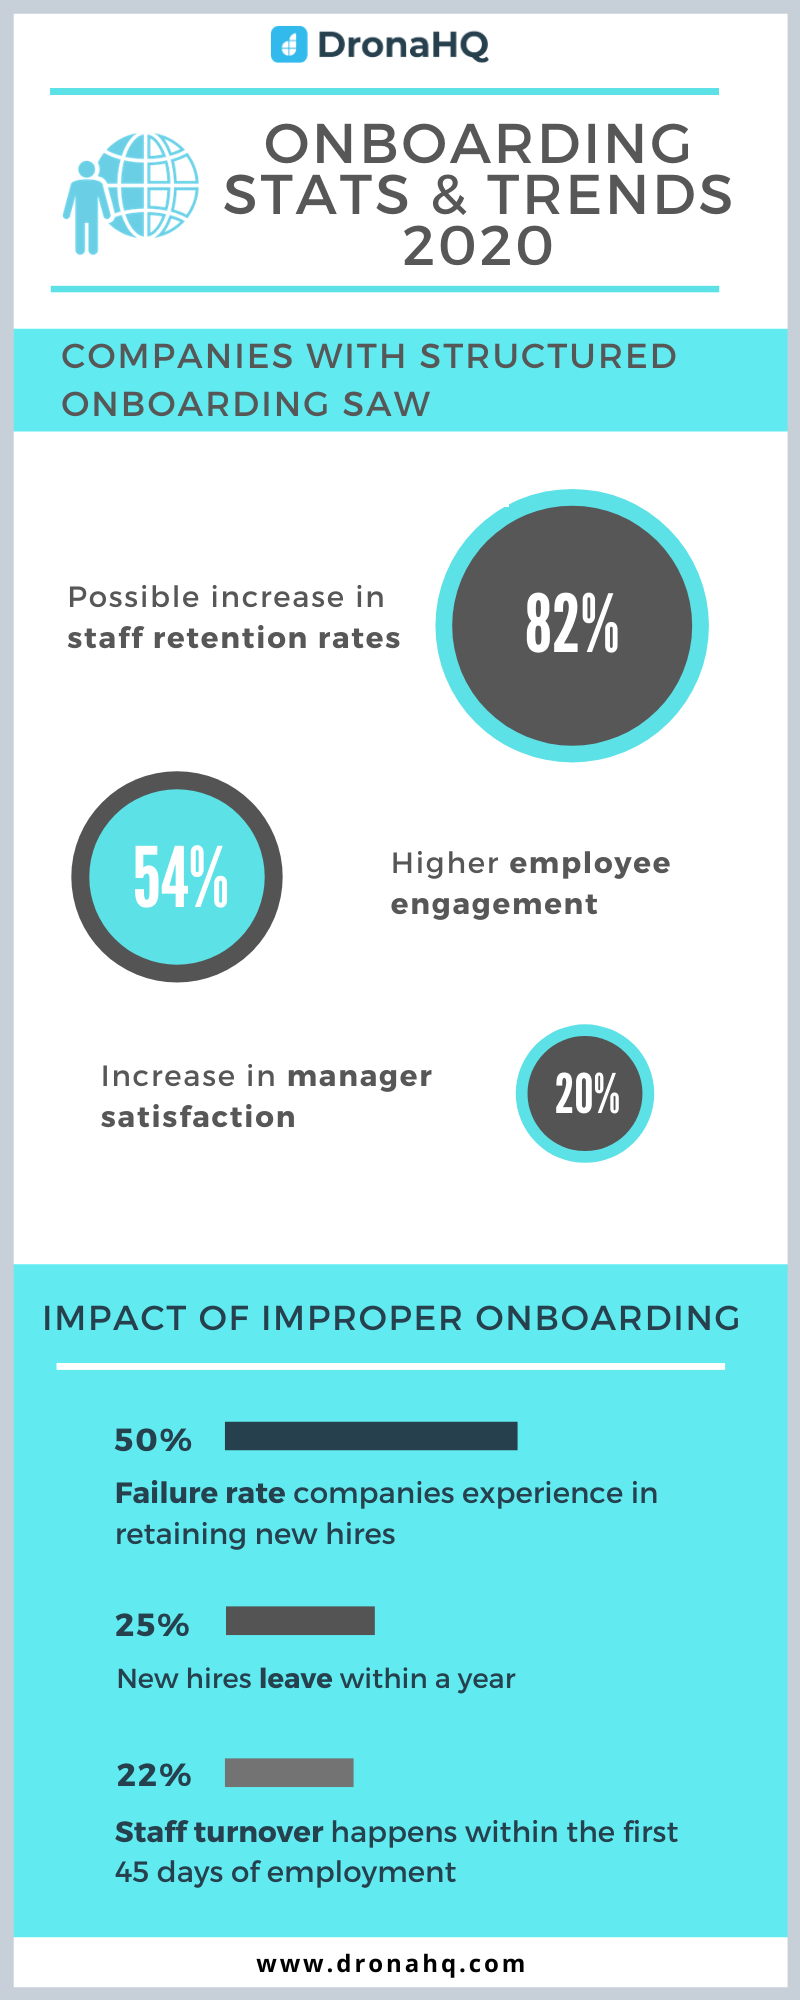 onboarding stats 2020 infographic